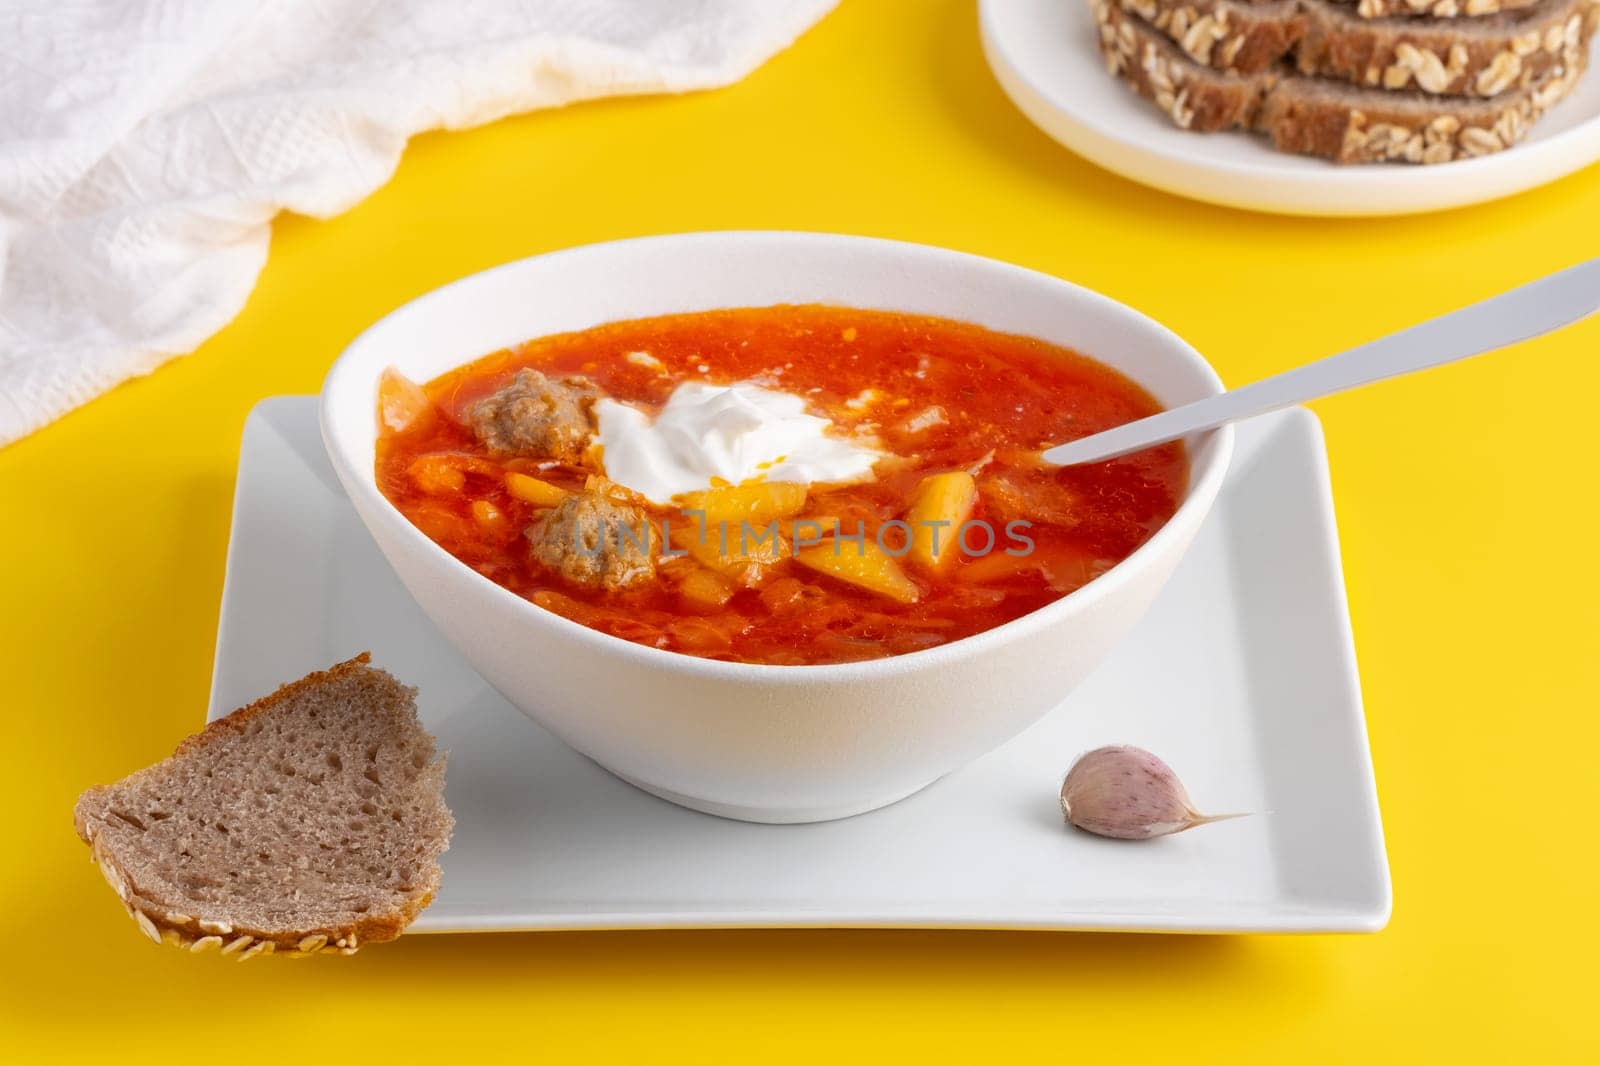 Ukrainian and Russian cuisine. Red borscht. Soup of tomatoes, cabbage and vegetables. Borscht in a white bowl on a yellow background.